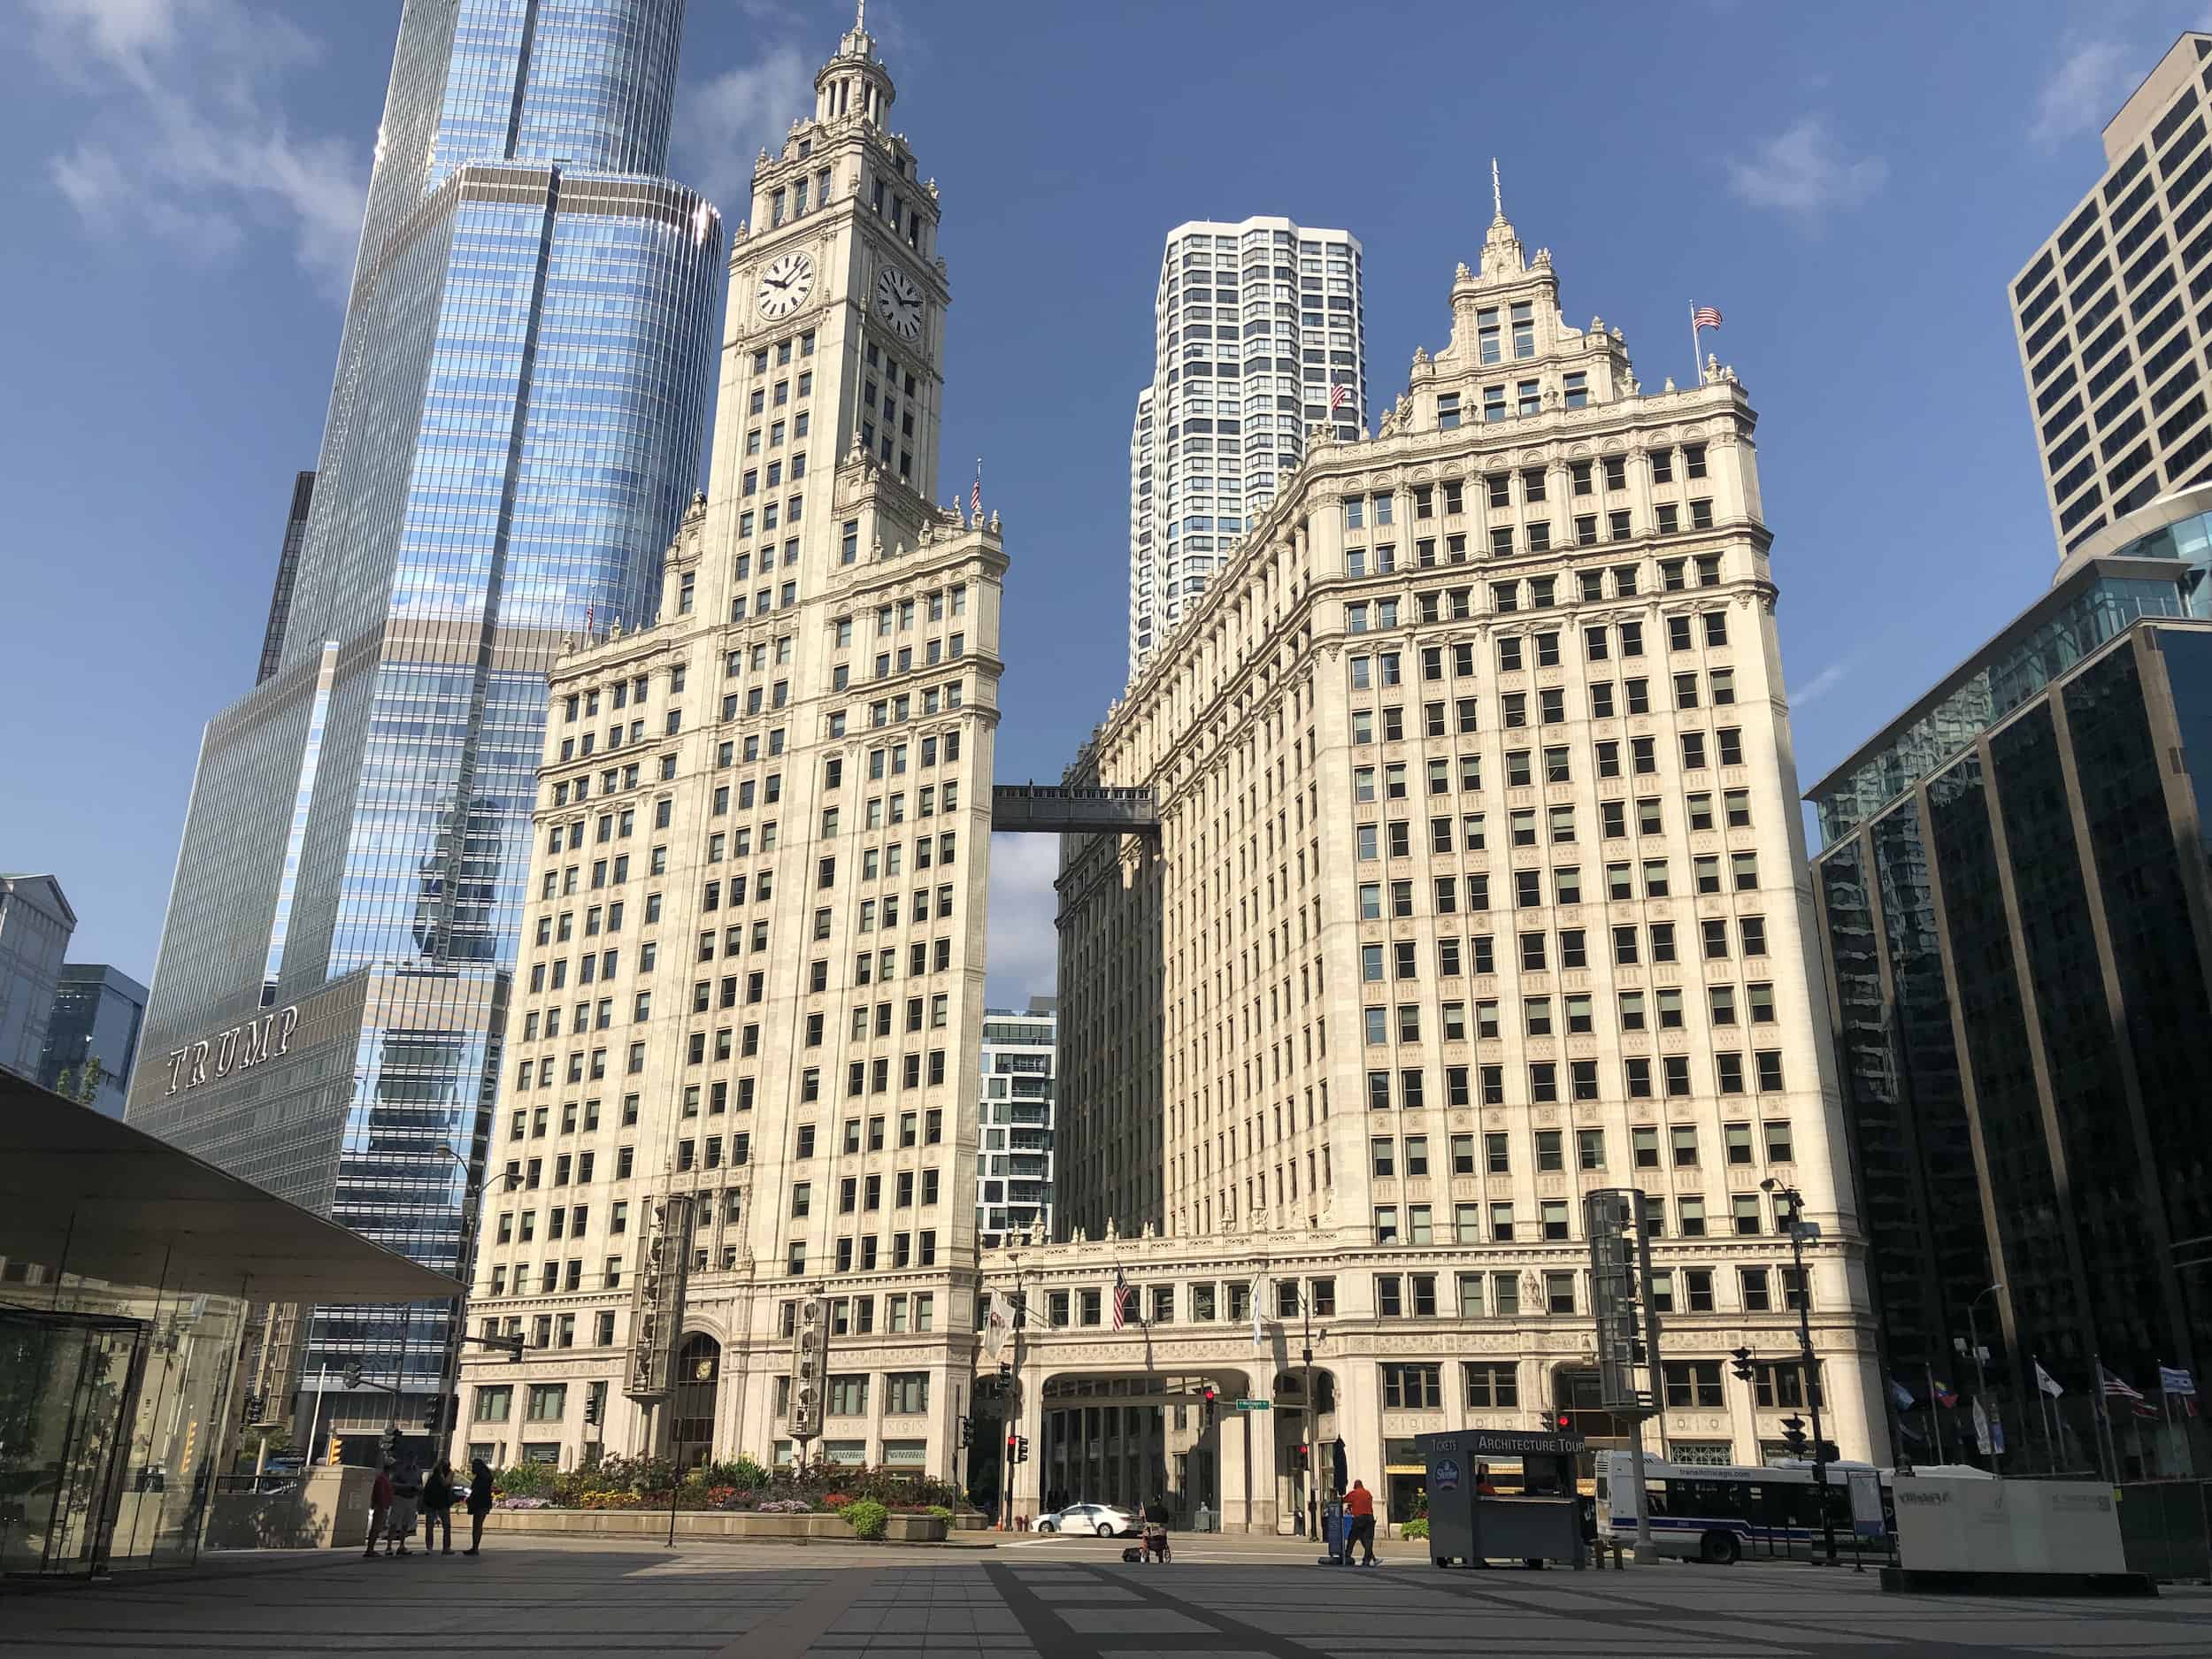 Wrigley Building along the Magnificent Mile in Chicago, Illinois